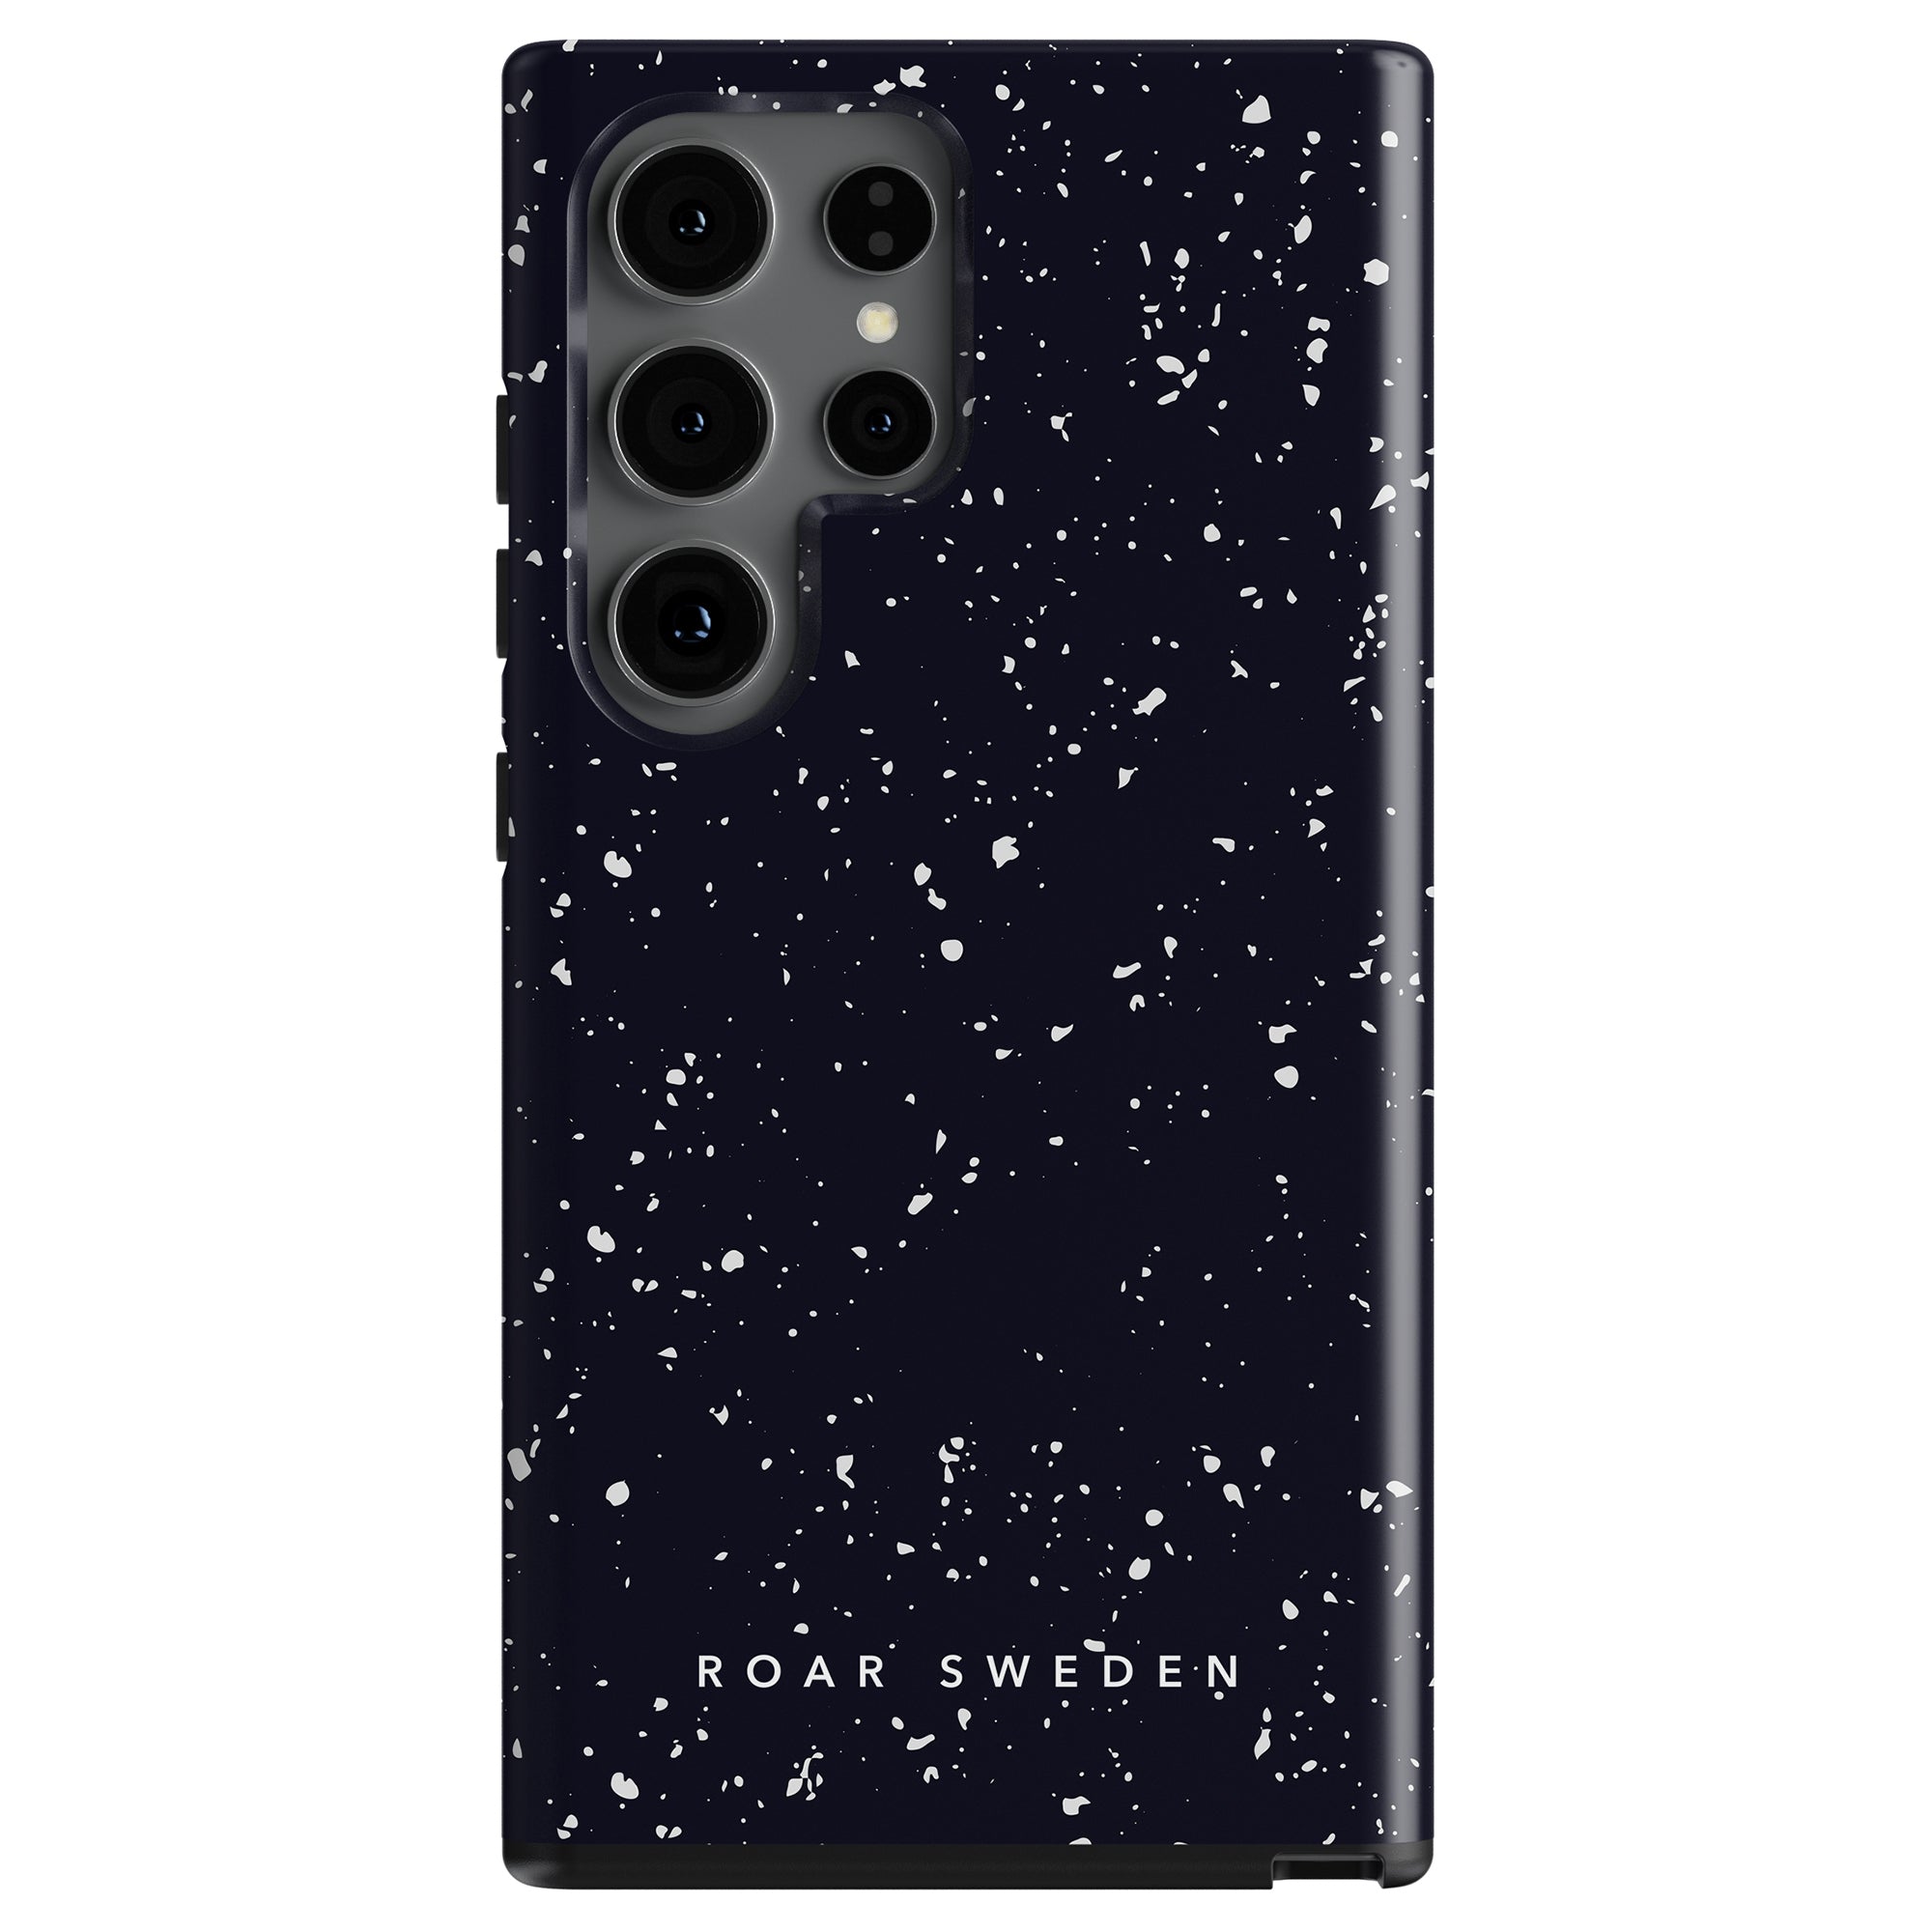 A smartphone with a Night Stars - Tough Case featuring a camera cutout and the logo "roar sweden" is known as the Night Stars tough case.